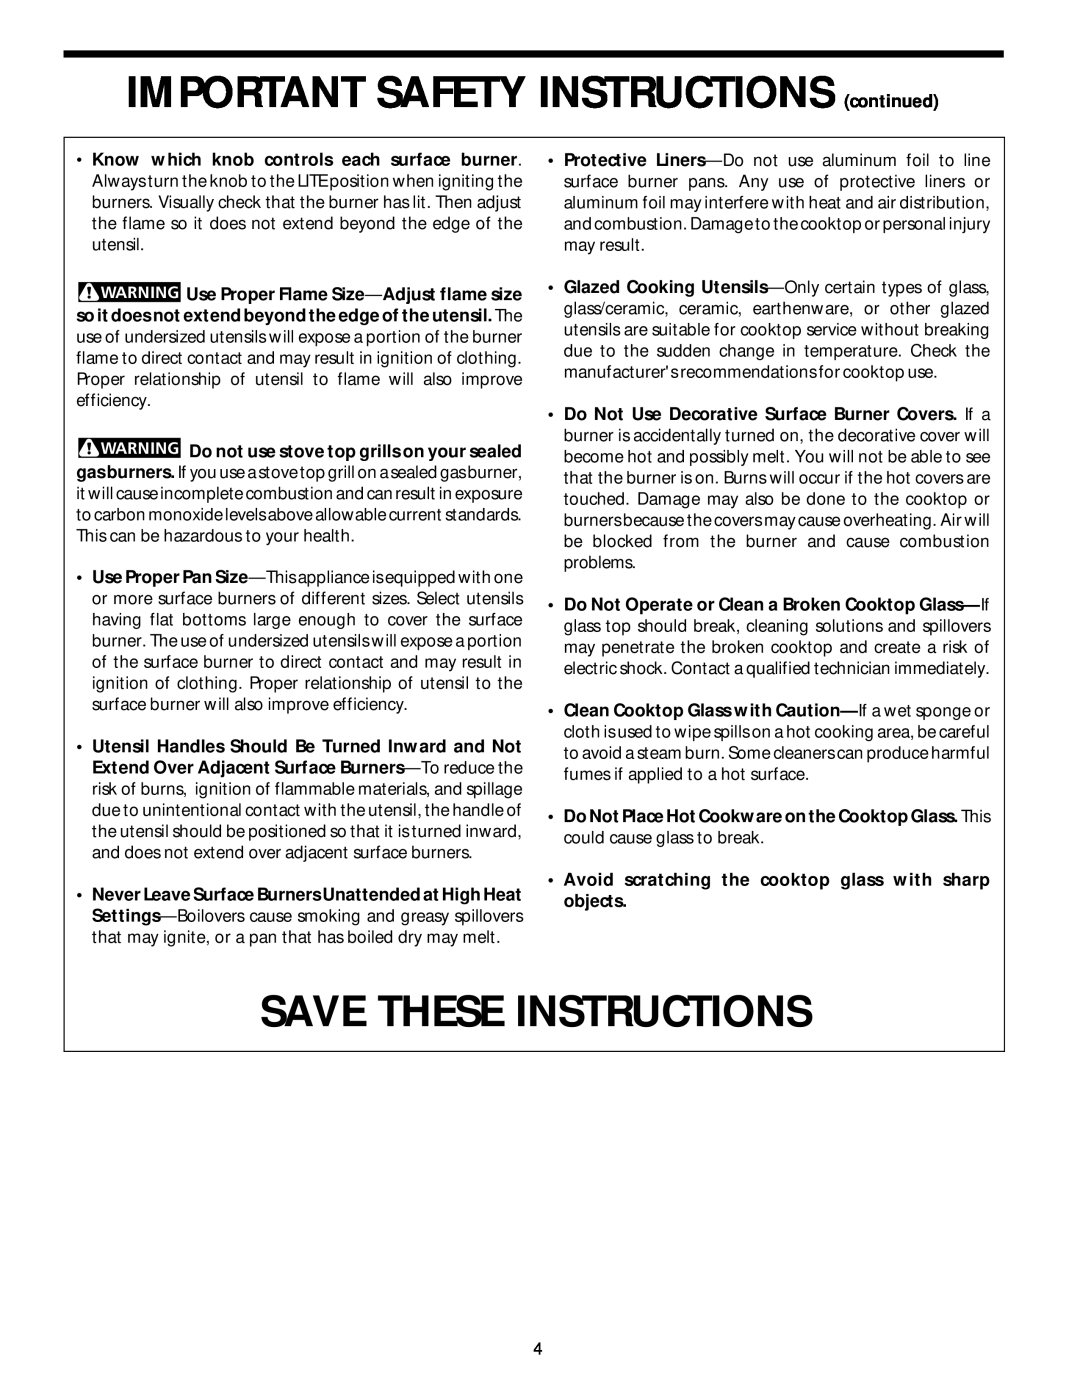 Frigidaire 318068129 important safety instructions IMPORTANT SAFETY INSTRUCTIONS continued, Save These Instructions 